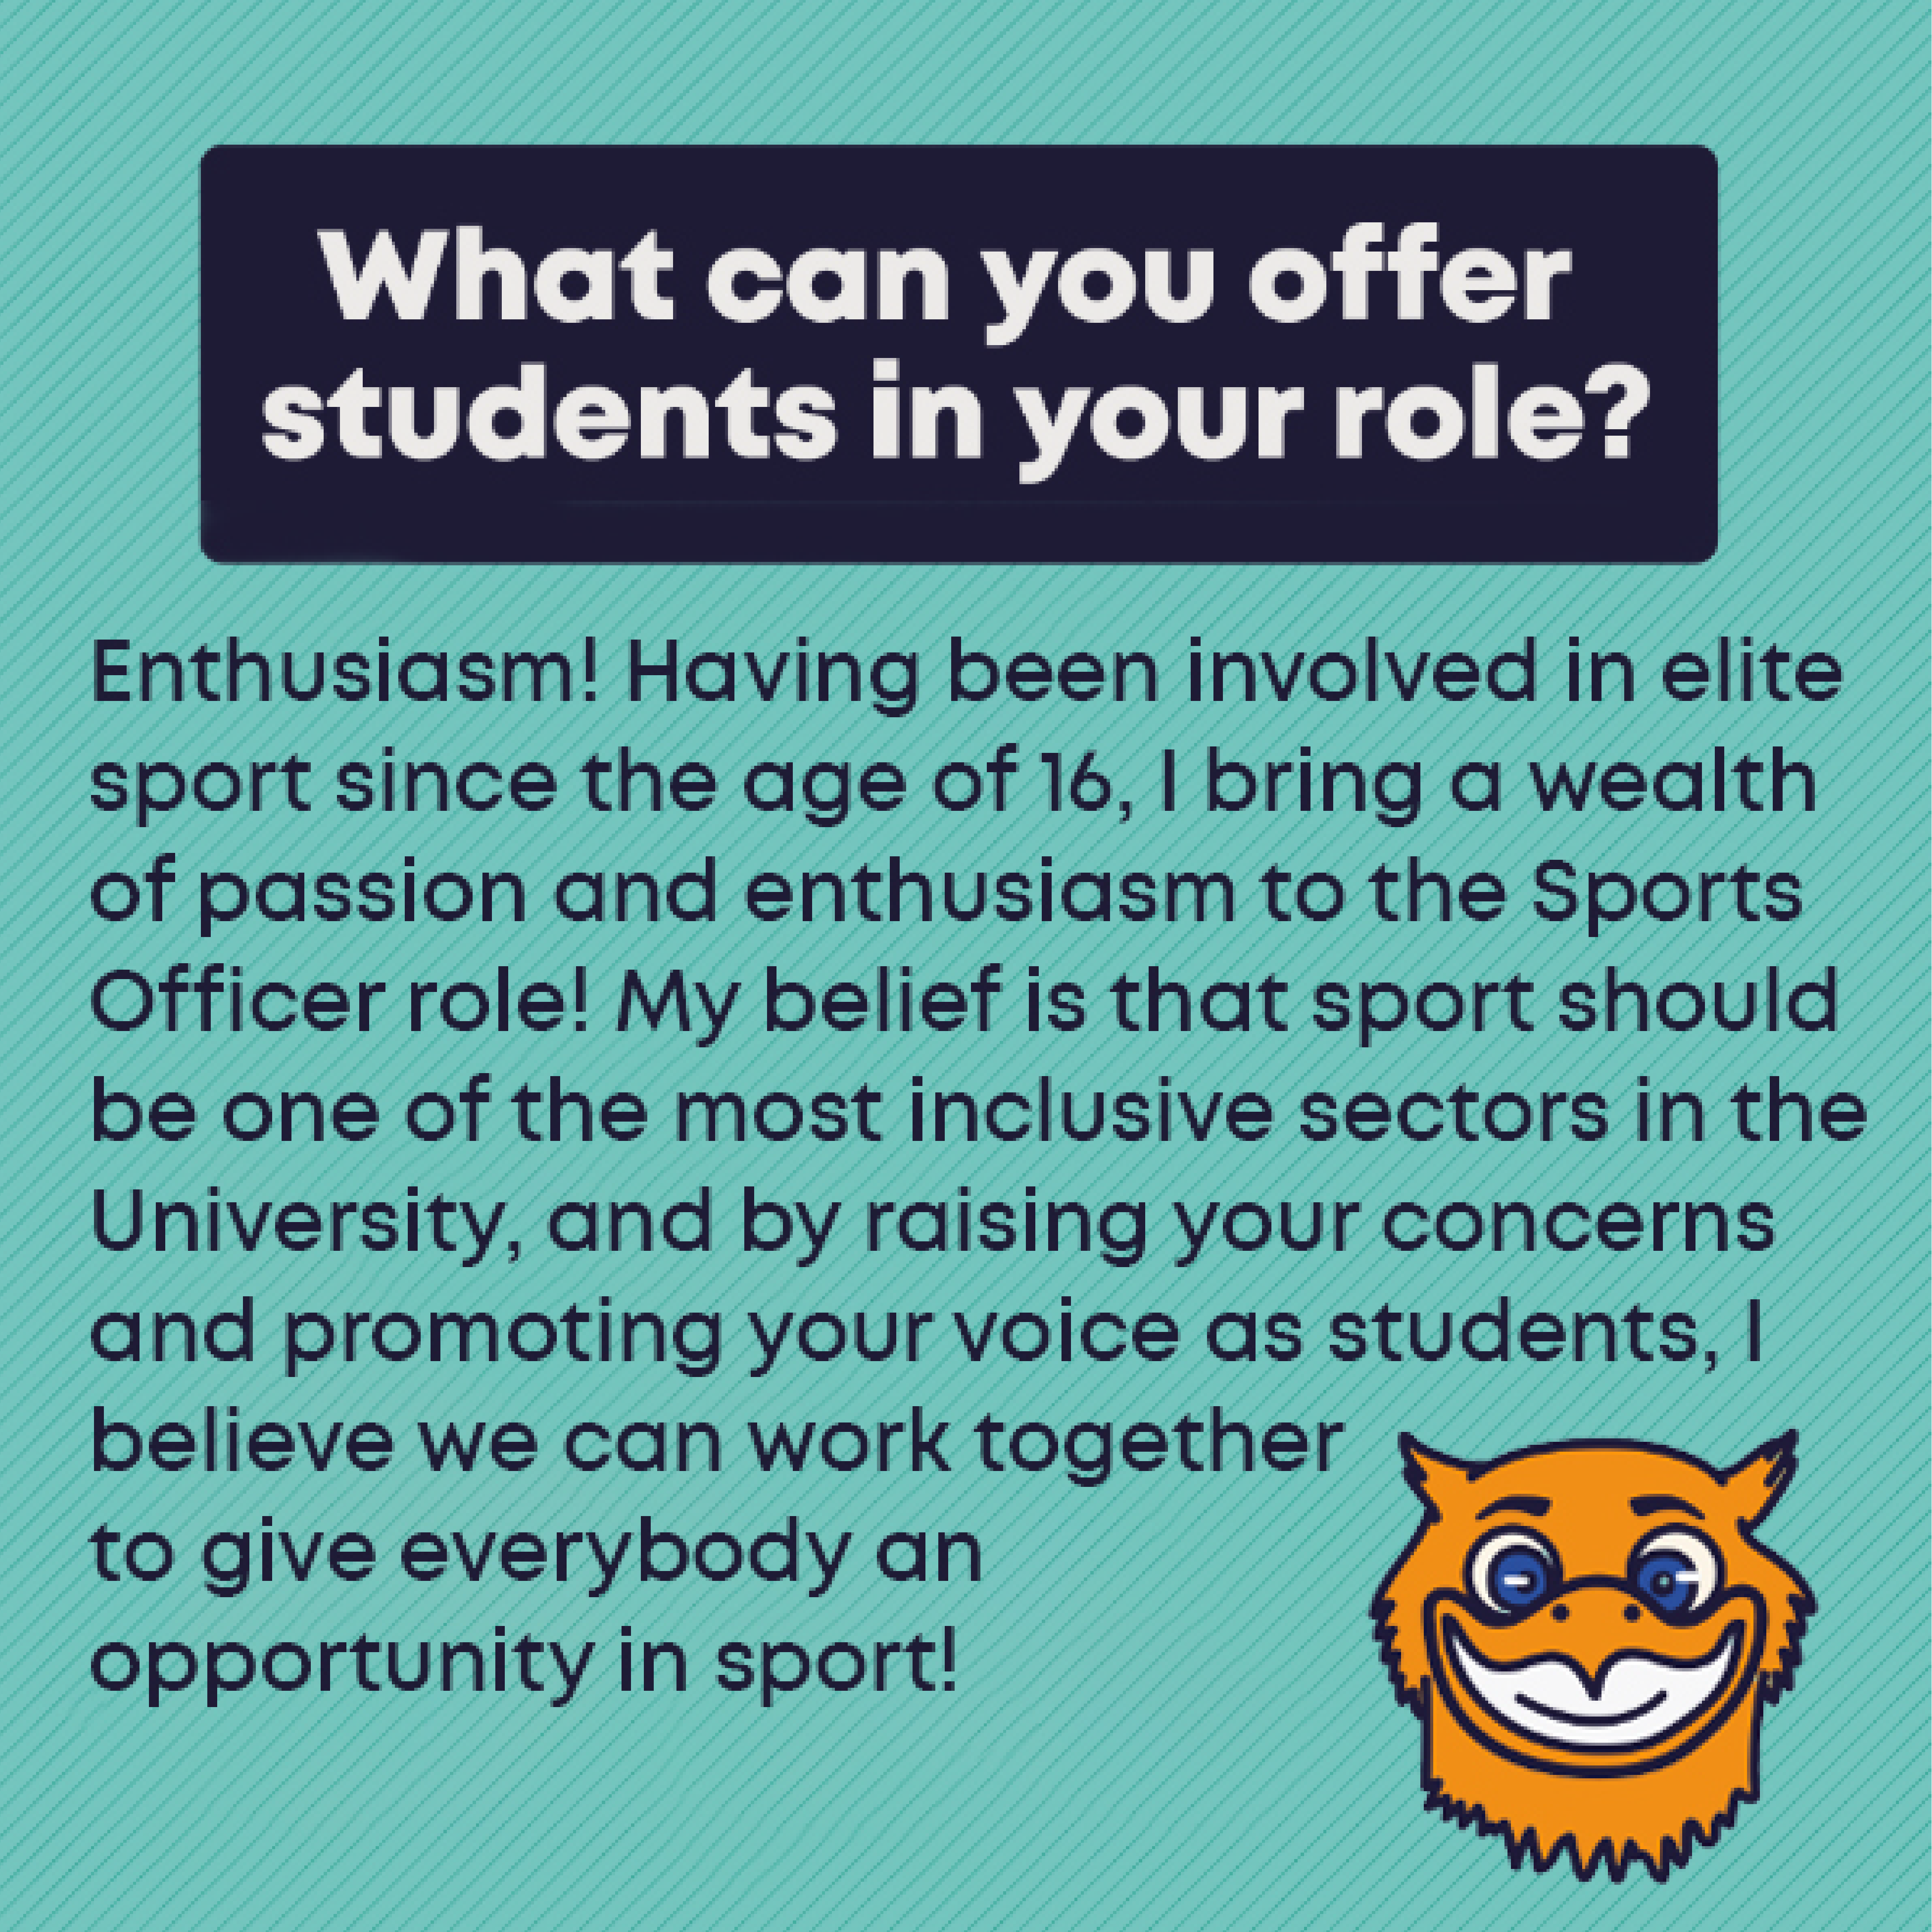 What can you offer students in your role?: Enthusiasm! Having been involved in elite sport since the age of 16, I bring a wealth of passion and enthusiasm to the Sports Officer role! My belief is that sport should be one of the most inclusive sectors in the University, and by raising your concerns and promoting your voice as students, I believe we can work together to give everybody an opportunity in sport!